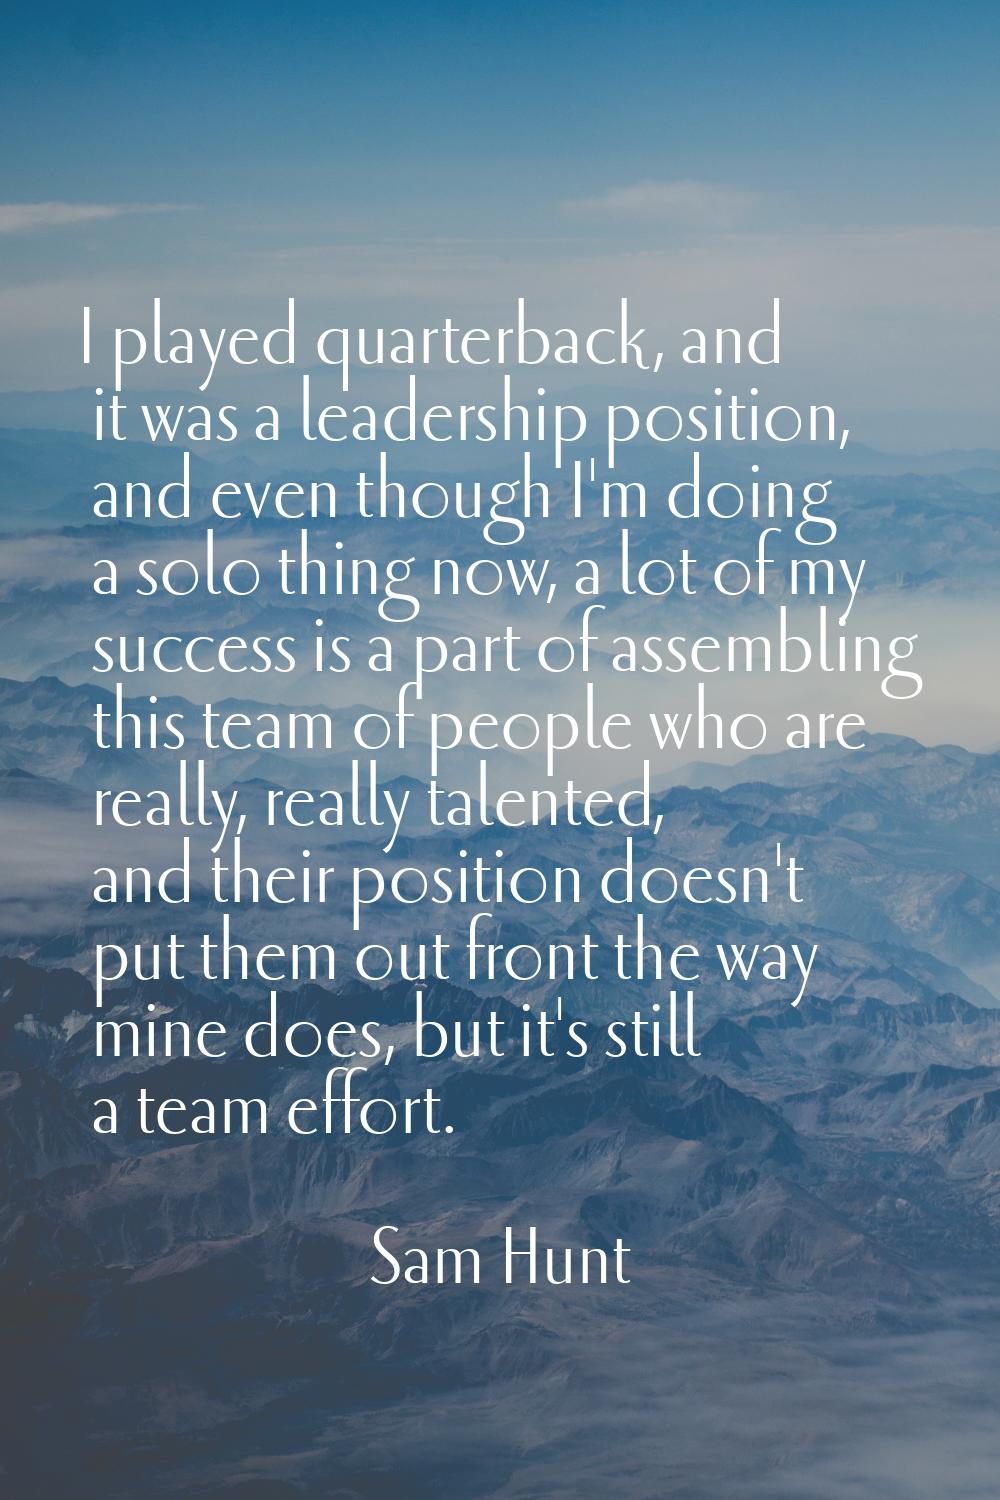 I played quarterback, and it was a leadership position, and even though I'm doing a solo thing now,